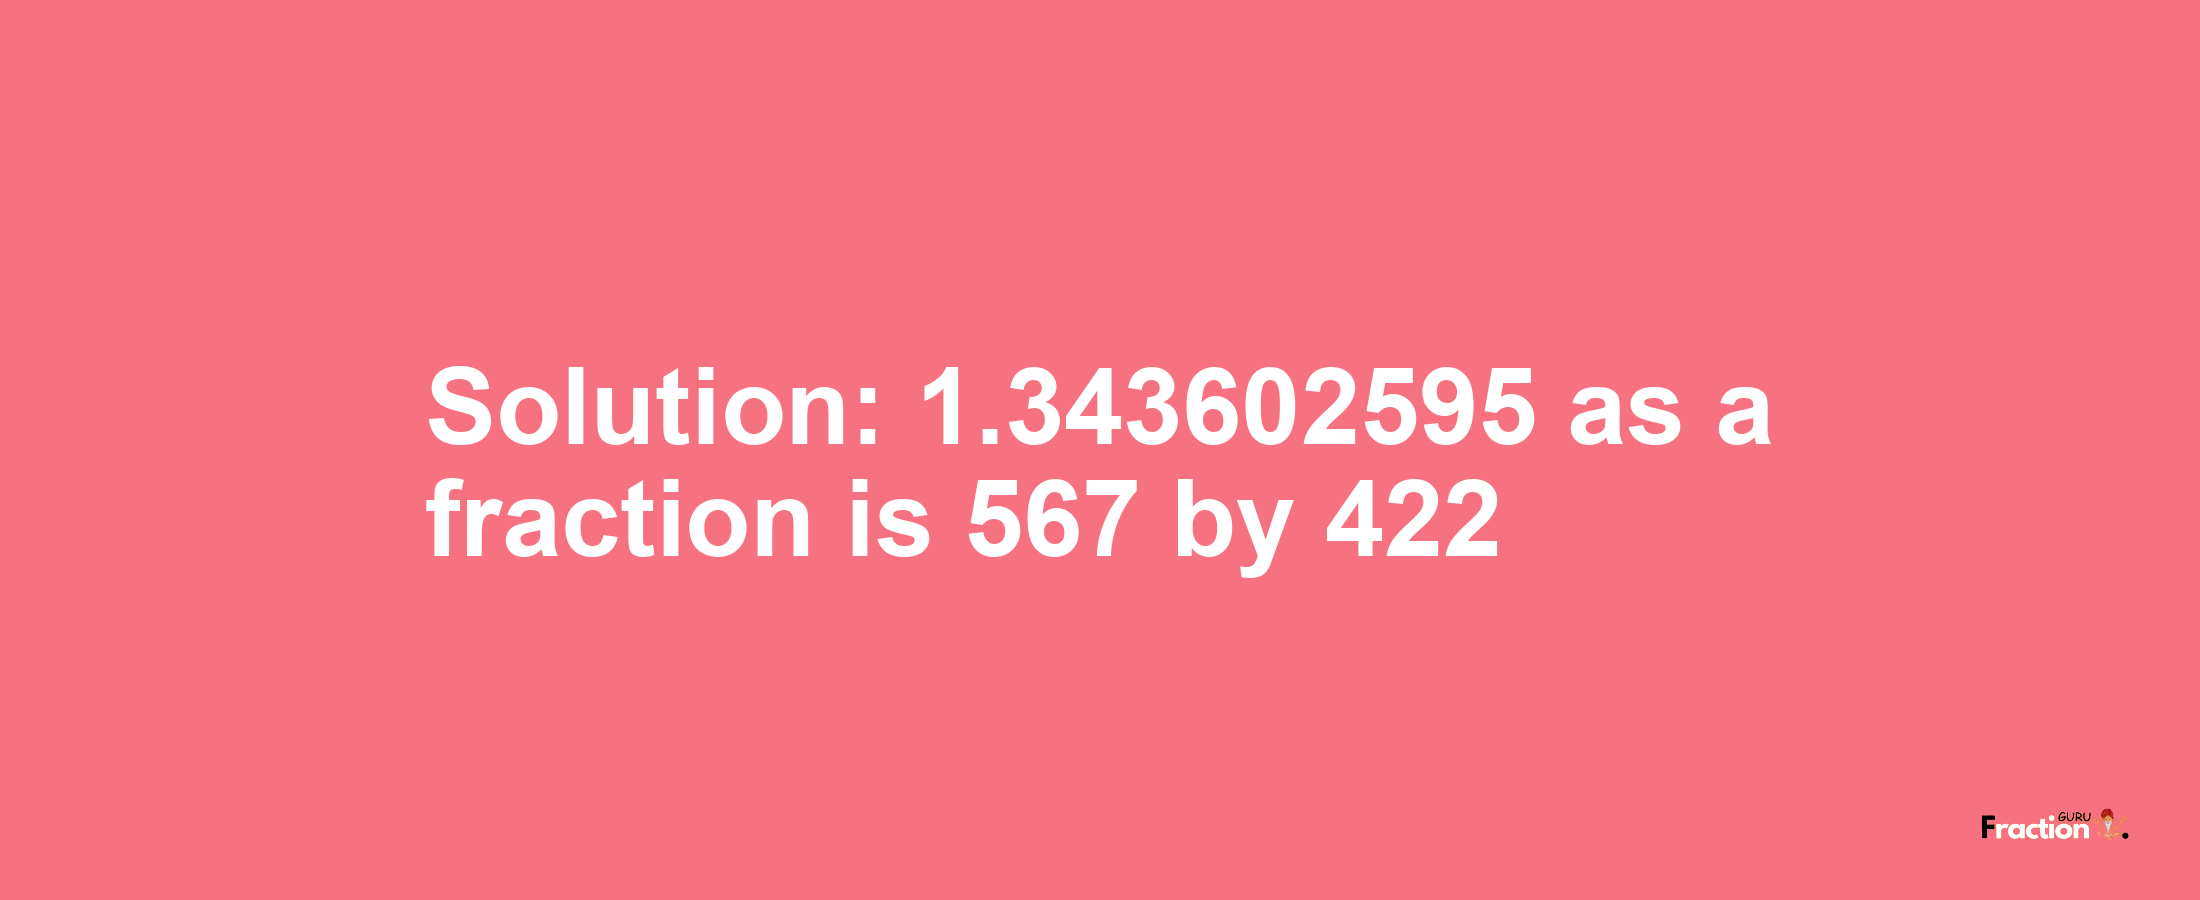 Solution:1.343602595 as a fraction is 567/422